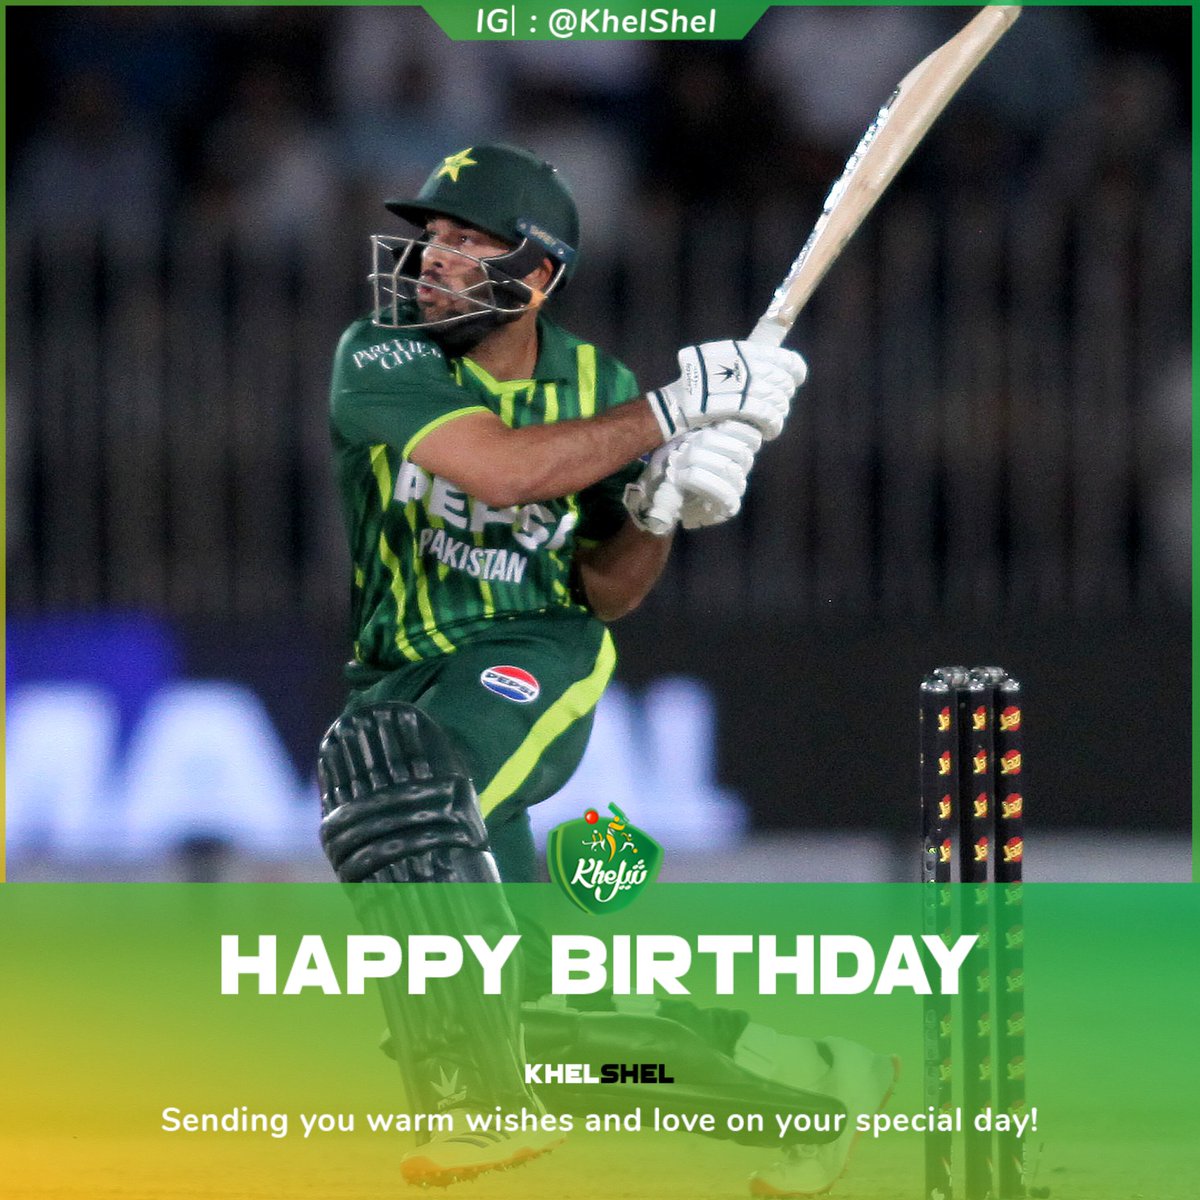 He was named best batsmen of #PSL9, Only player to have scored two centuries in a single season in PSL. A promising right-handed batsman, Happy Birthday Usman Khan 🎂🥳 #Cricket | #Pakistan | #UsmanKhan | #Birthday | #Karachi | #Sheikhupura